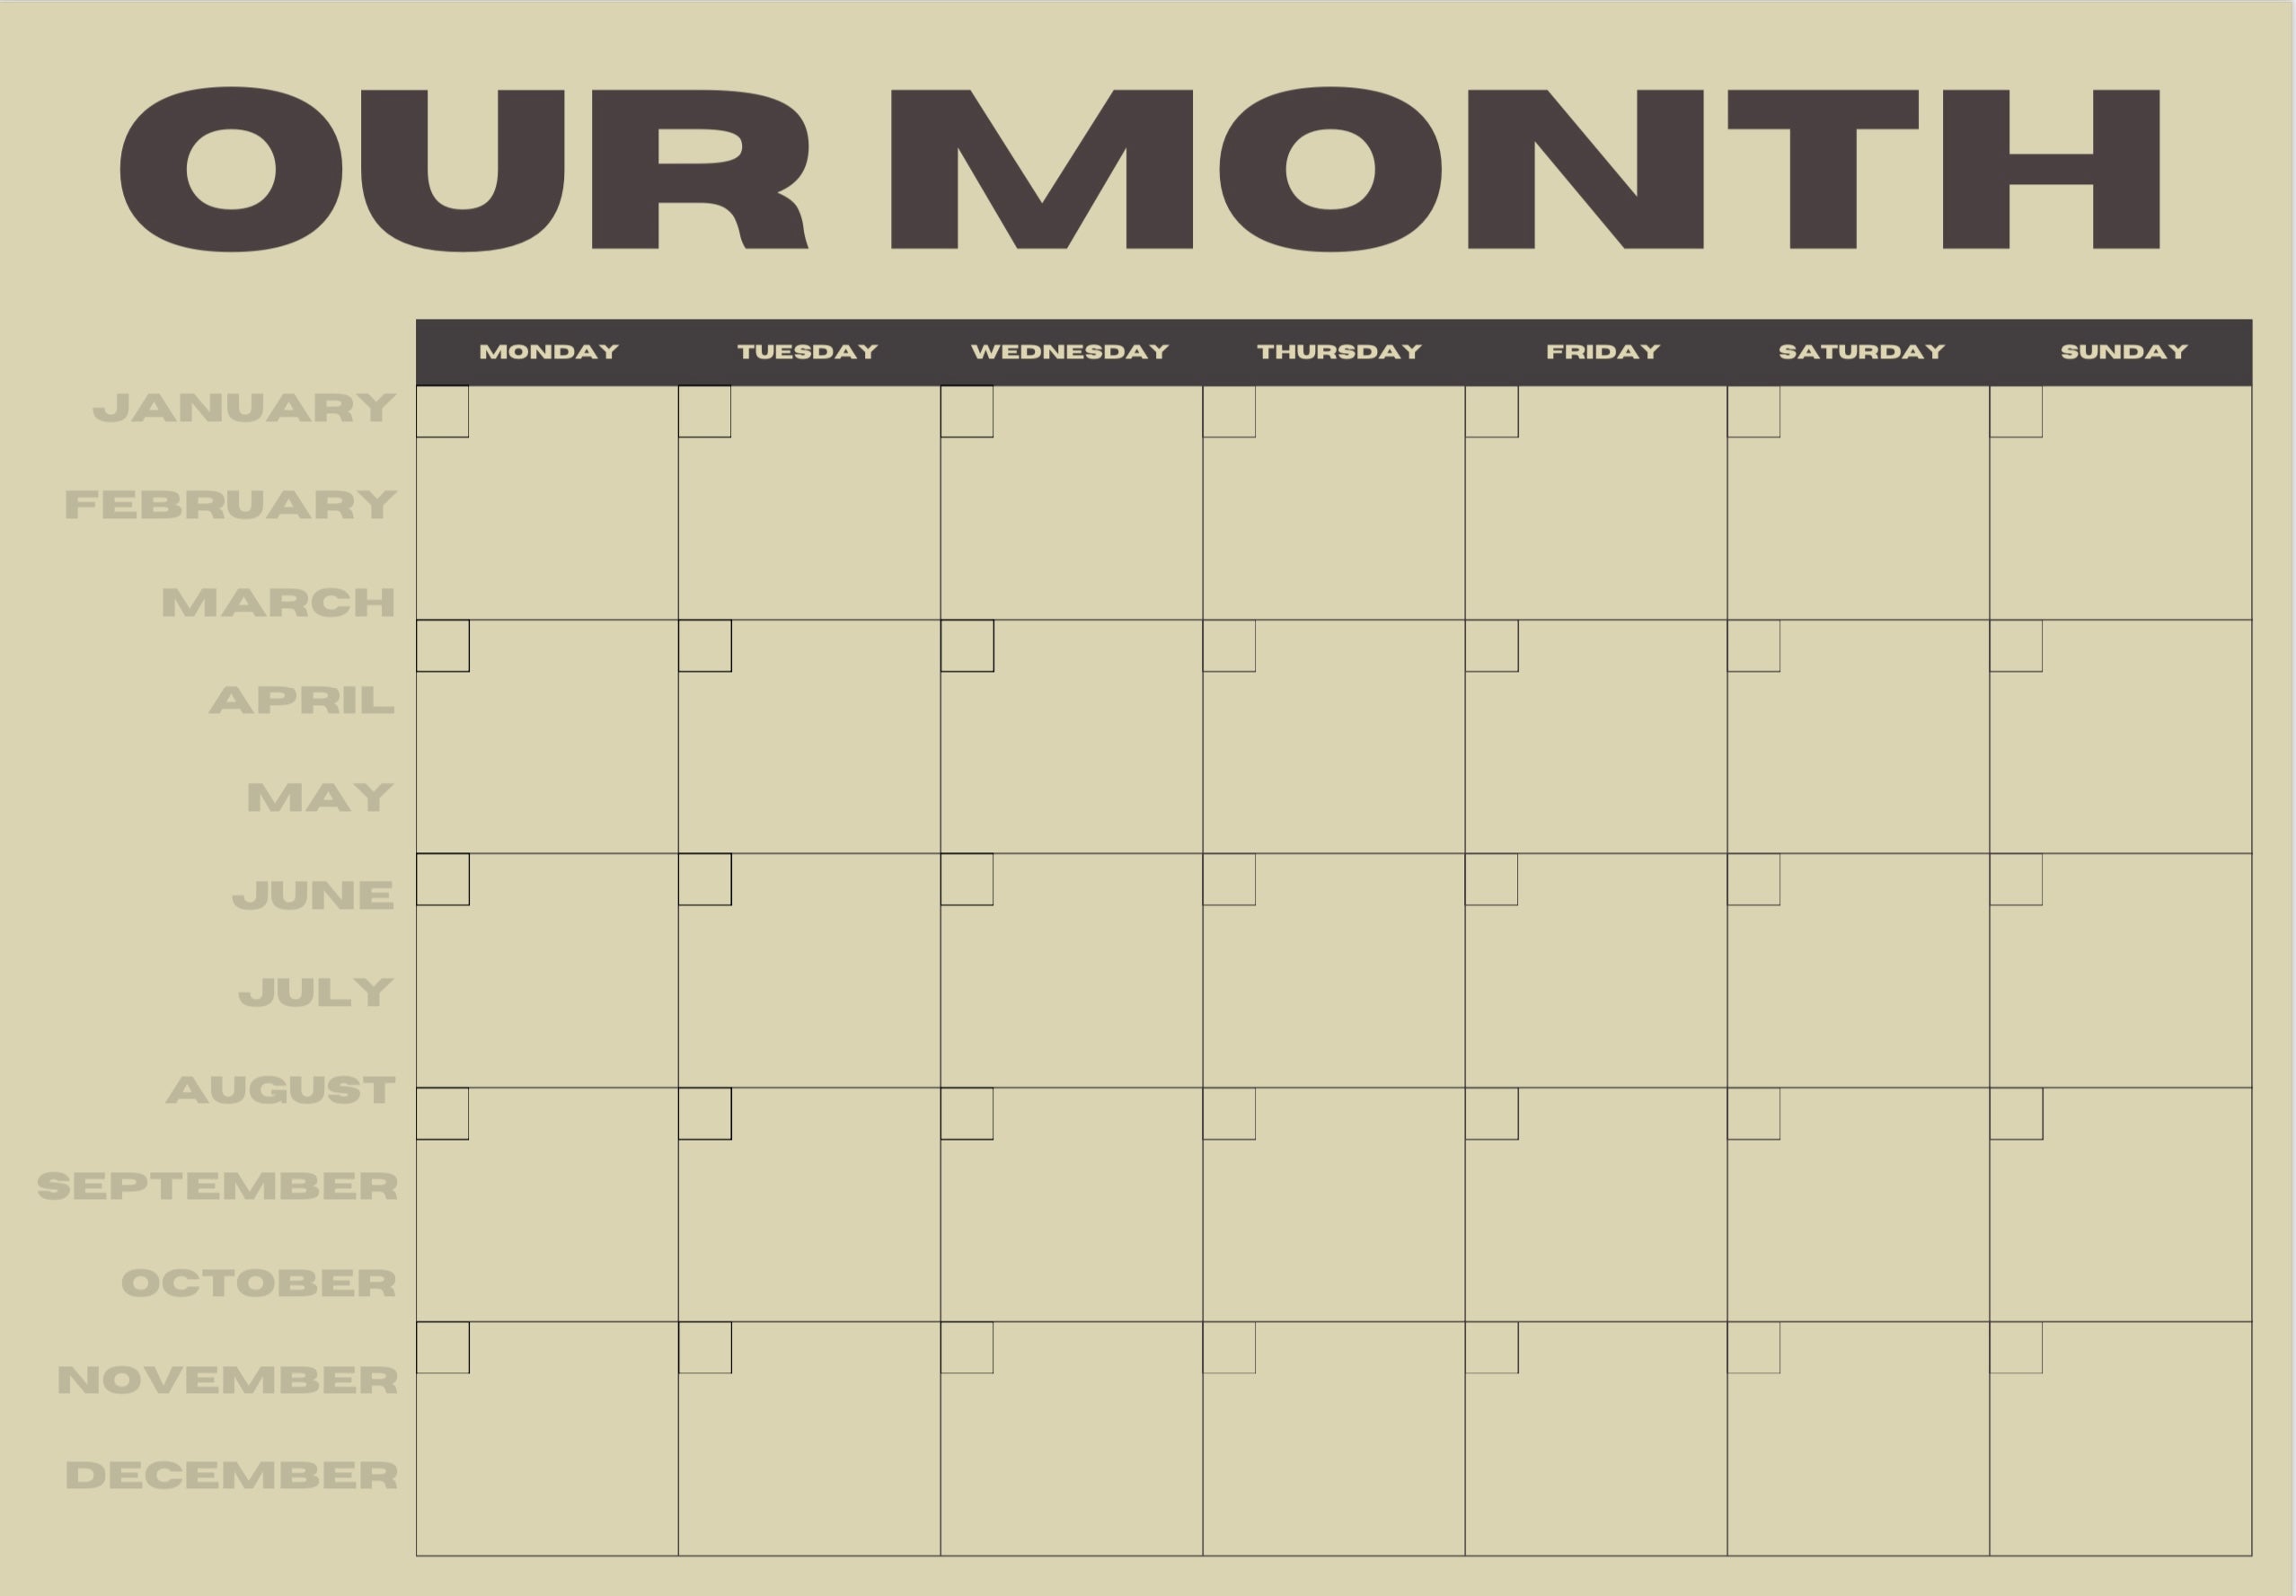 Our Month Planner - Green and Black